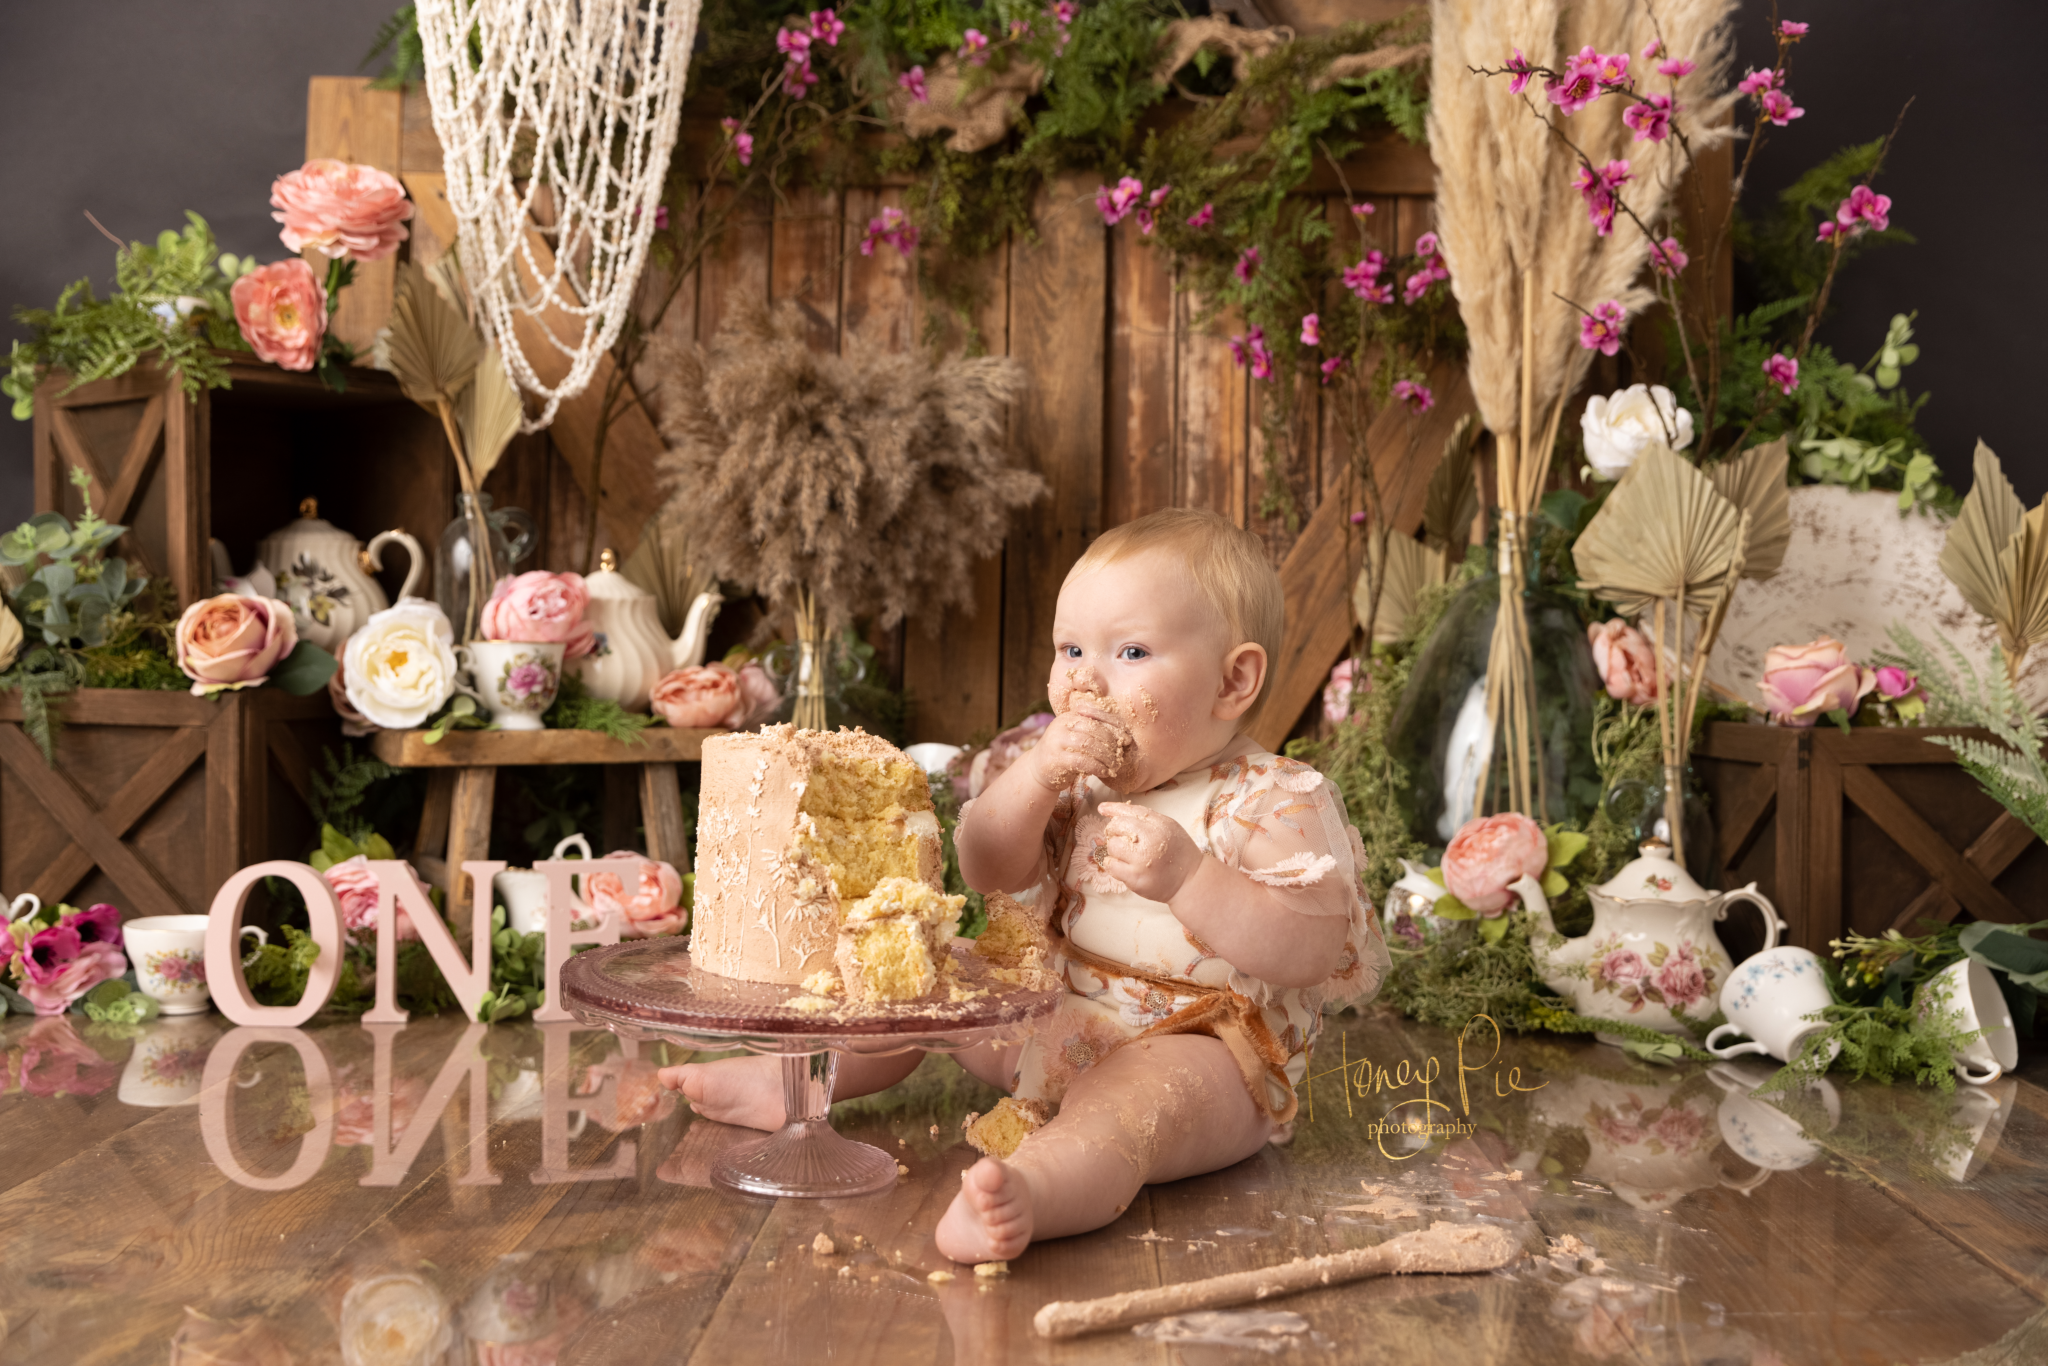 Baby girl chowing down on a chunk of birthday cake with vintage tea cups & pampas grass decor surrounding her